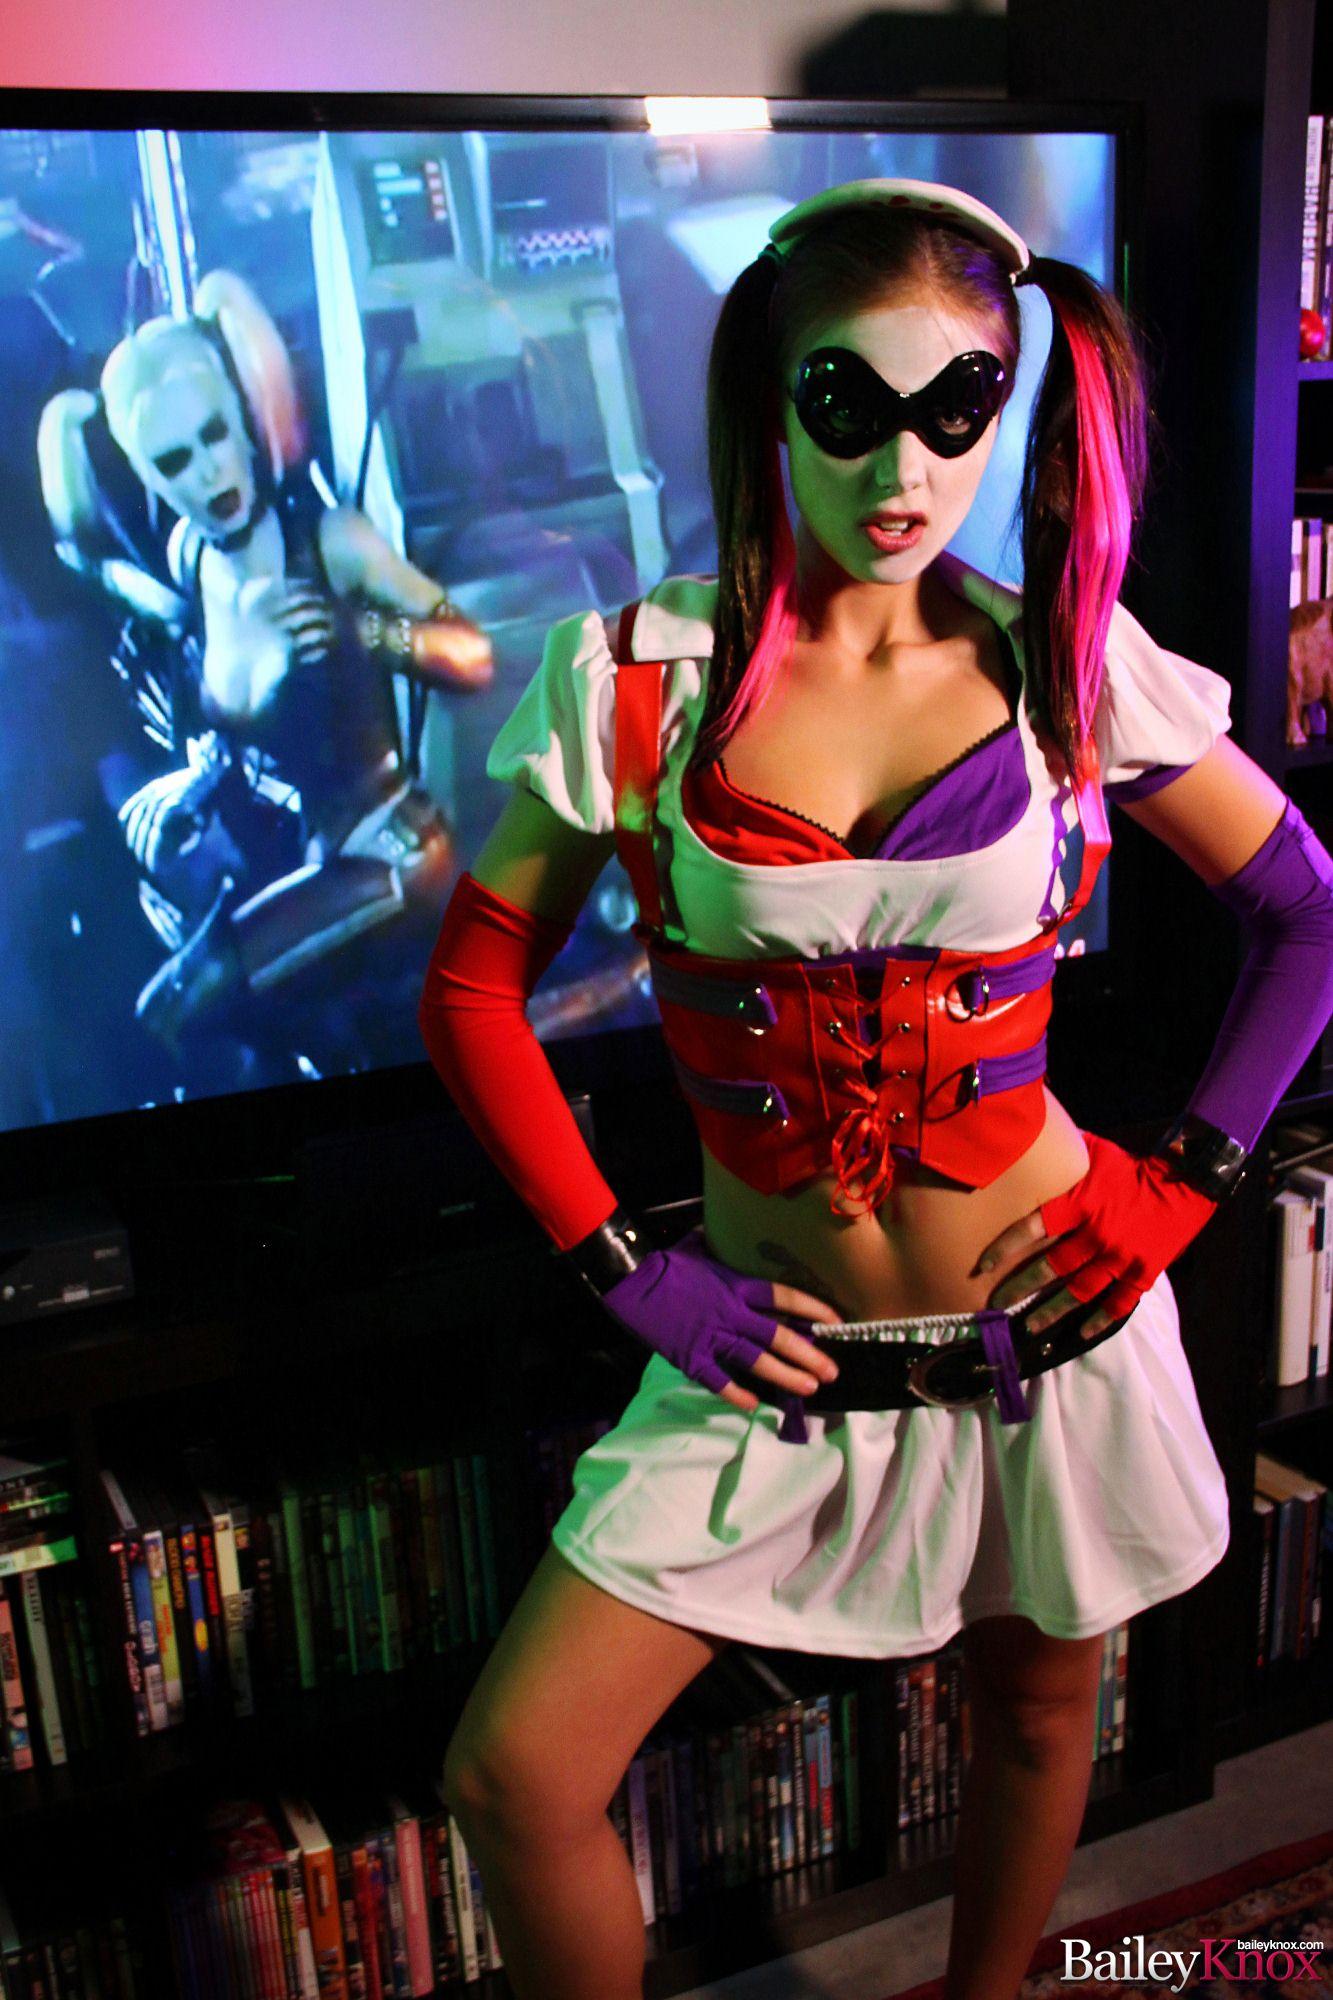 Bailey Knox gives you a little Harley Quinn from Arkham Asylum cosplay #53399005